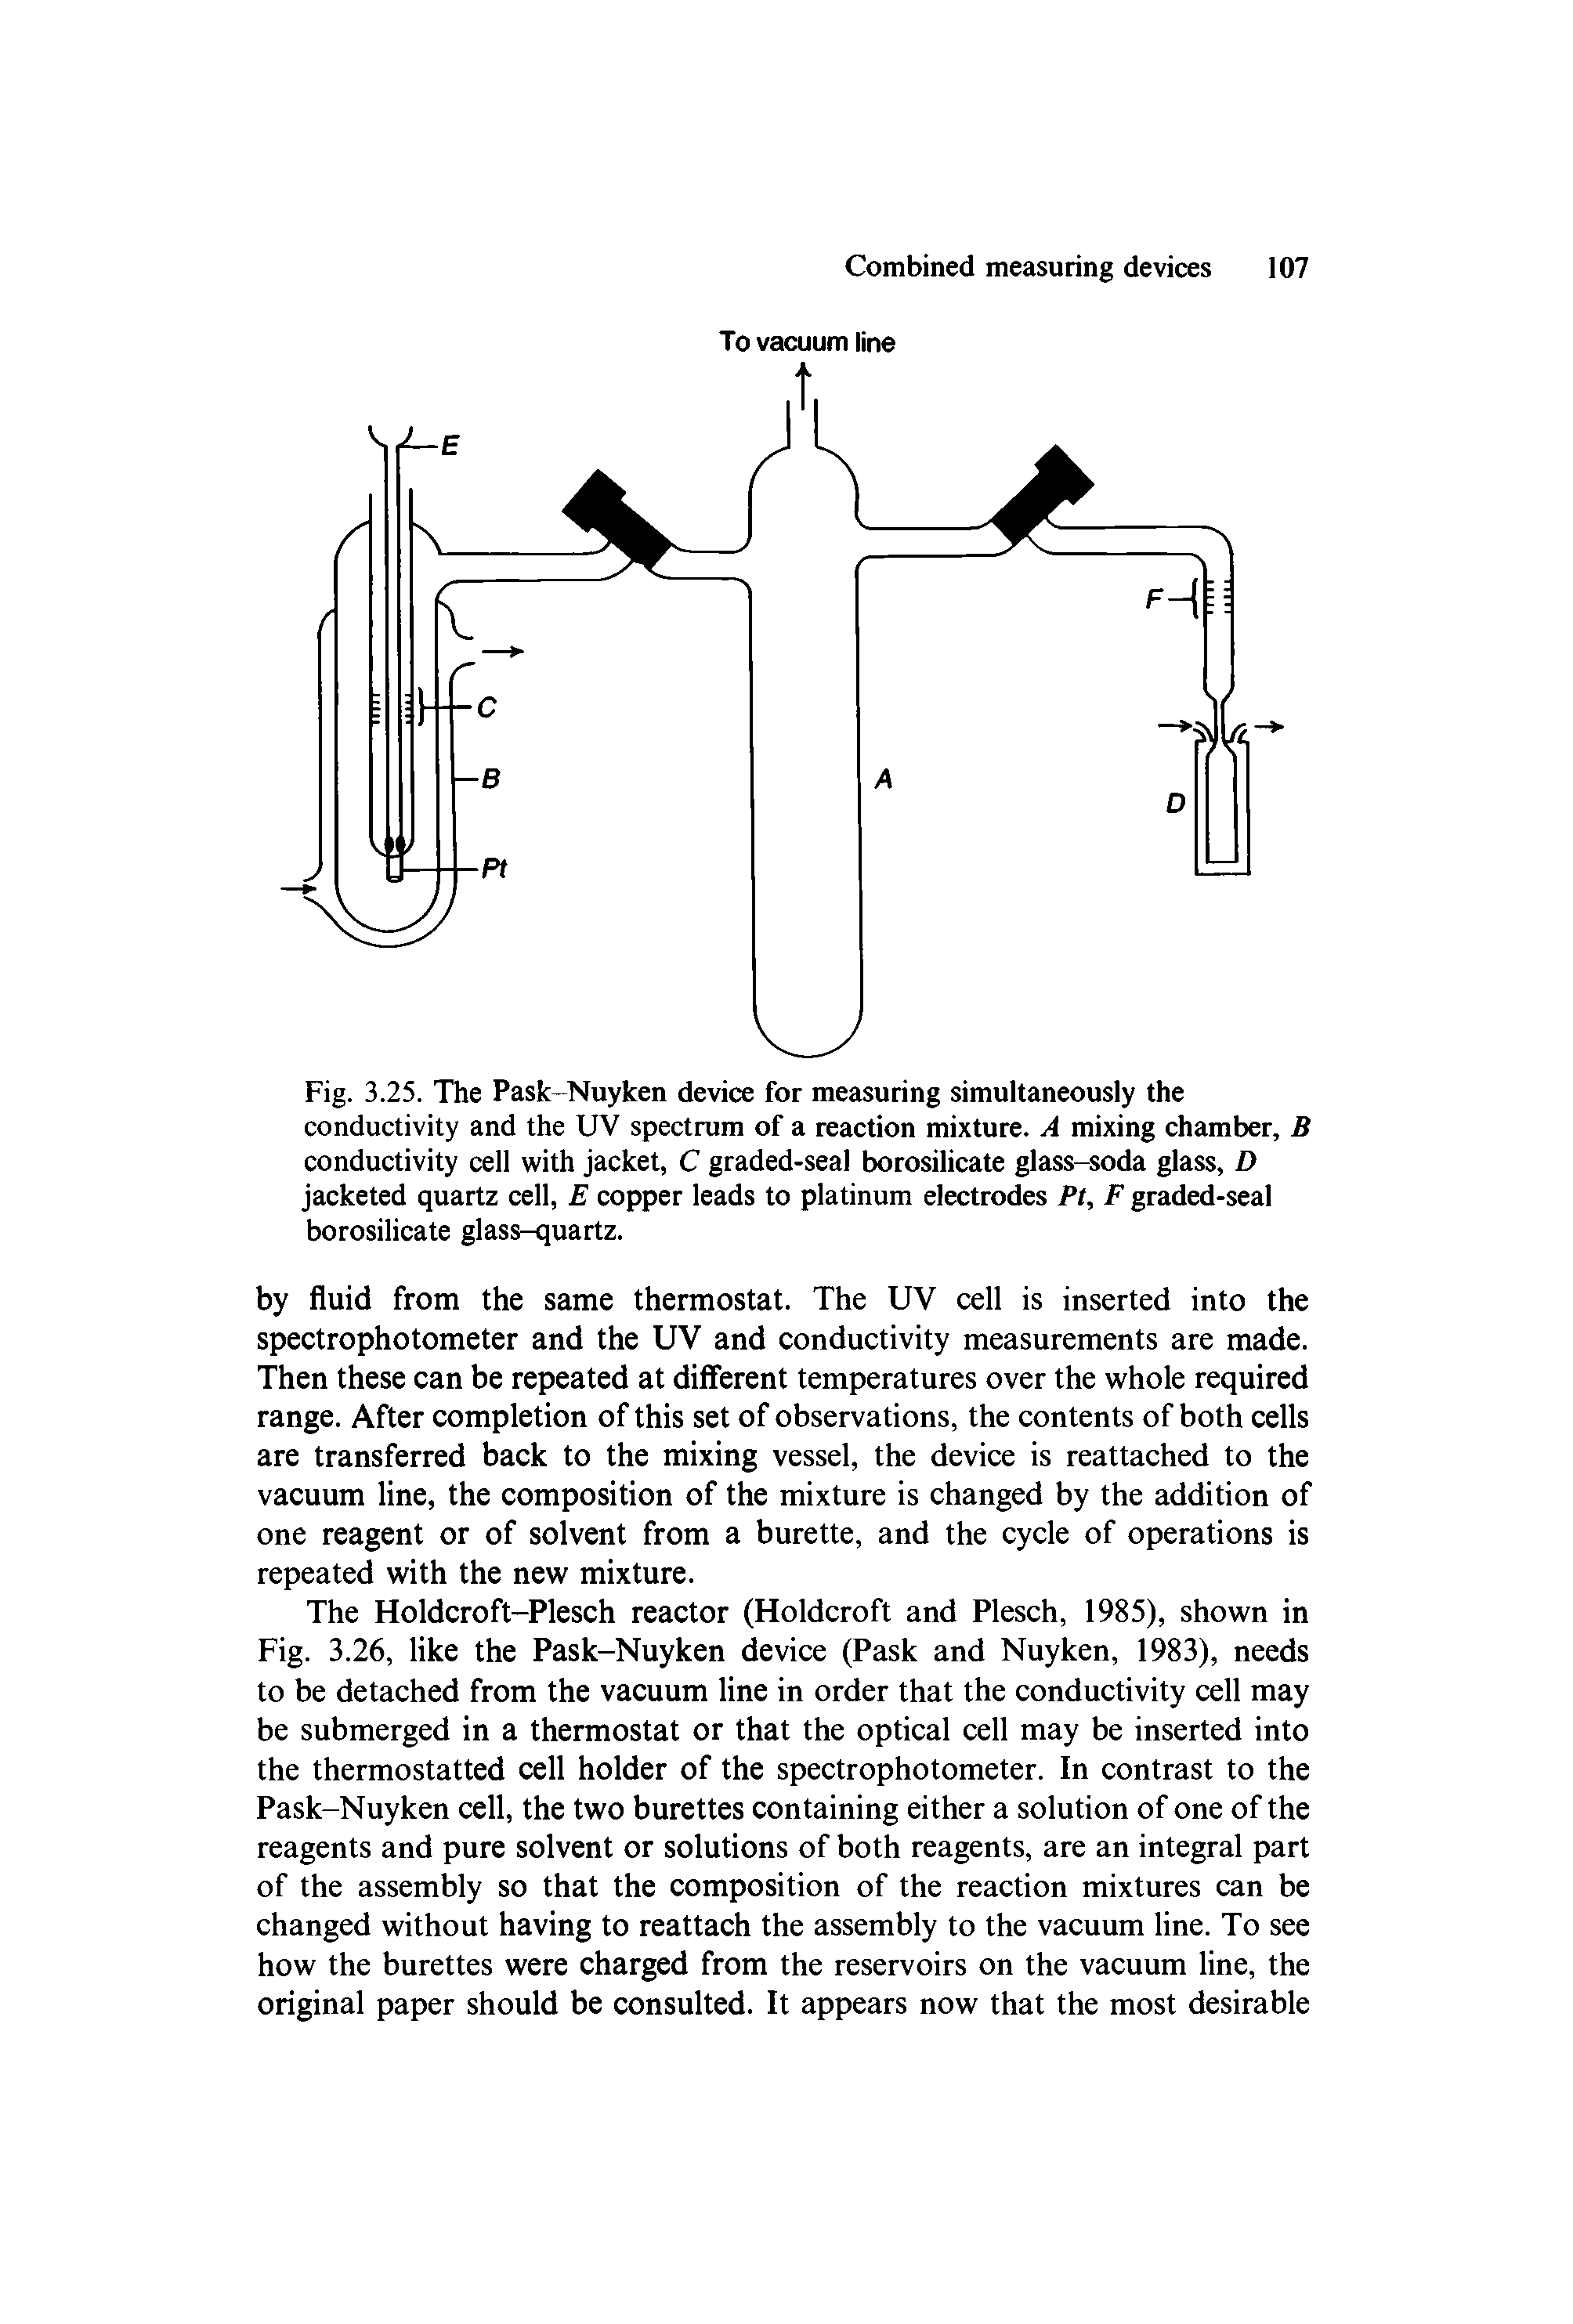 Fig. 3.25. The Pask-Nuyken device for measuring simultaneously the conductivity and the UV spectrum of a reaction mixture. A mixing chamber, B conductivity cell with jacket, C graded-seal borosilicate glass-soda glass, D jacketed quartz cell, E copper leads to platinum electrodes Pt, F graded-seal borosilicate glass-quartz.